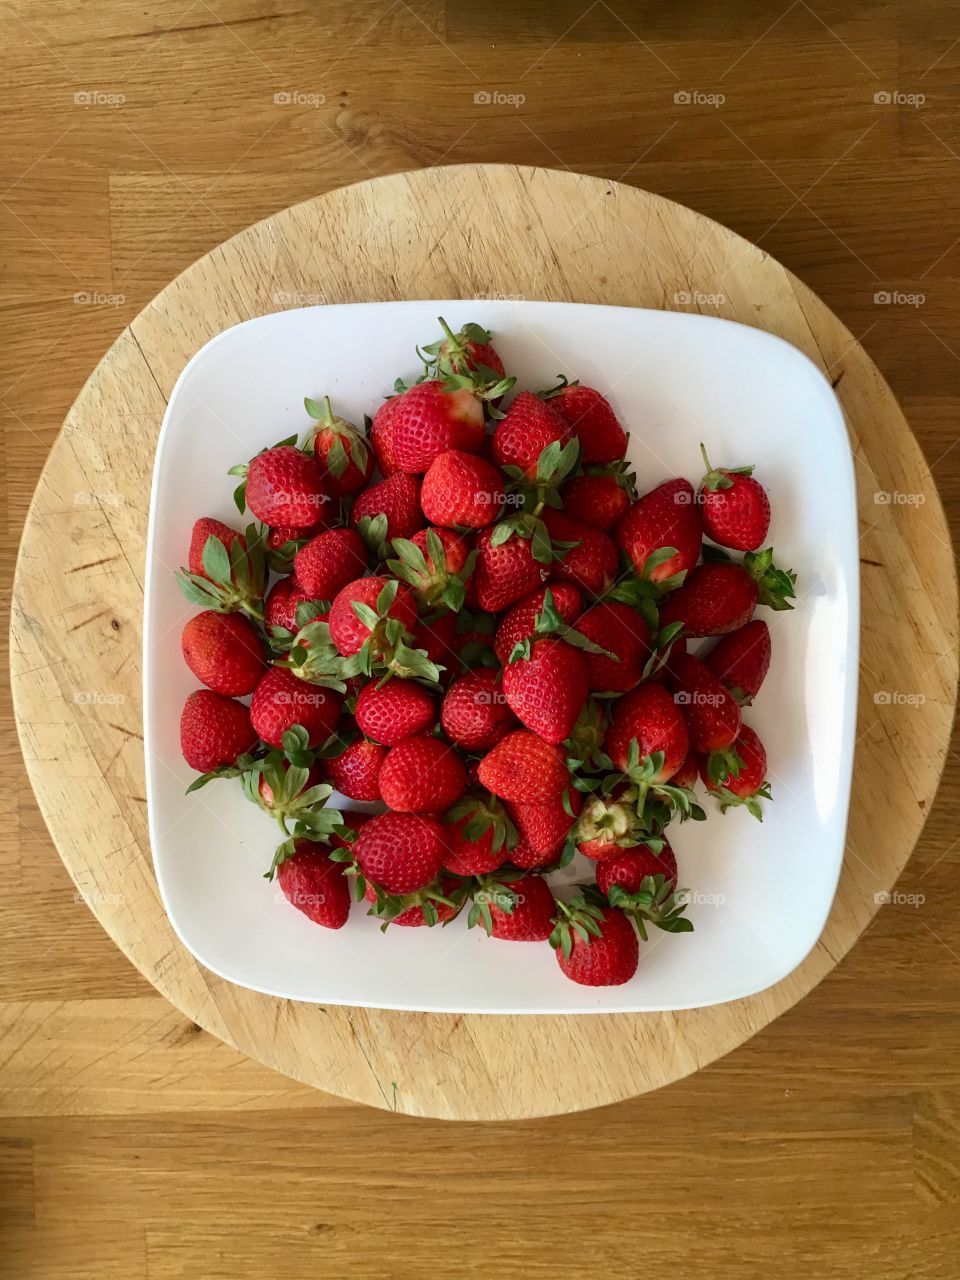 This is a photo of red strawberries on a white plate on a wooden table.